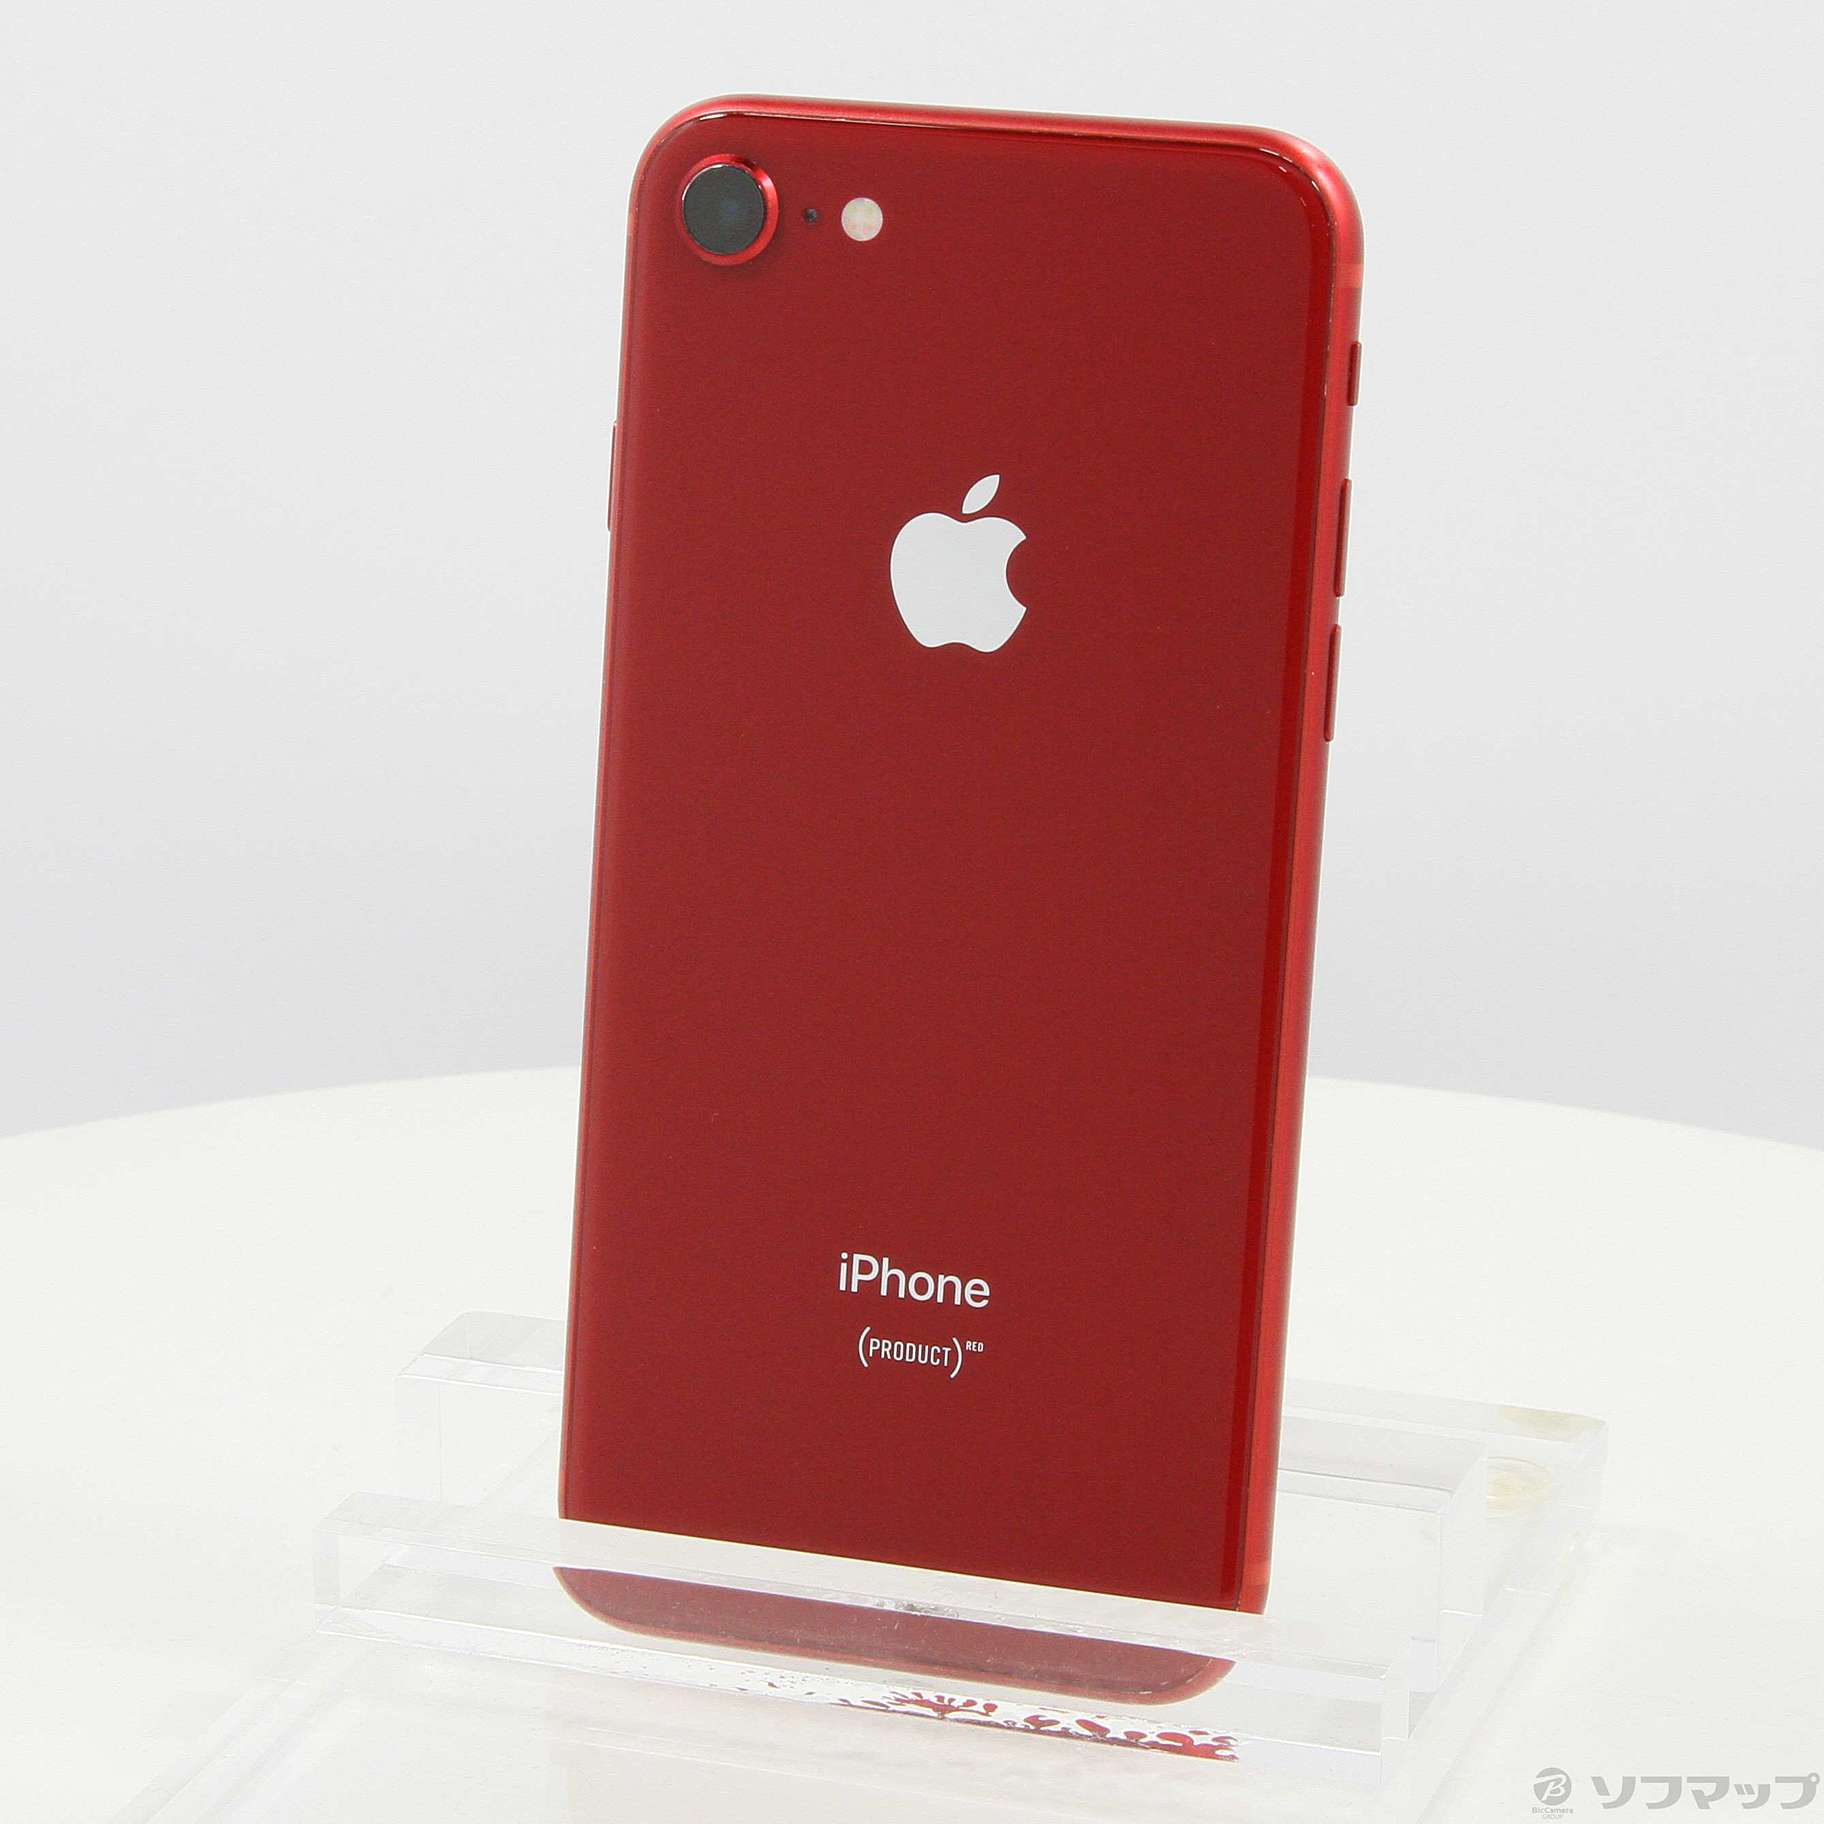 iPhone 8 PRODUCT RED プロダクトレッド 256GB | nate-hospital.com